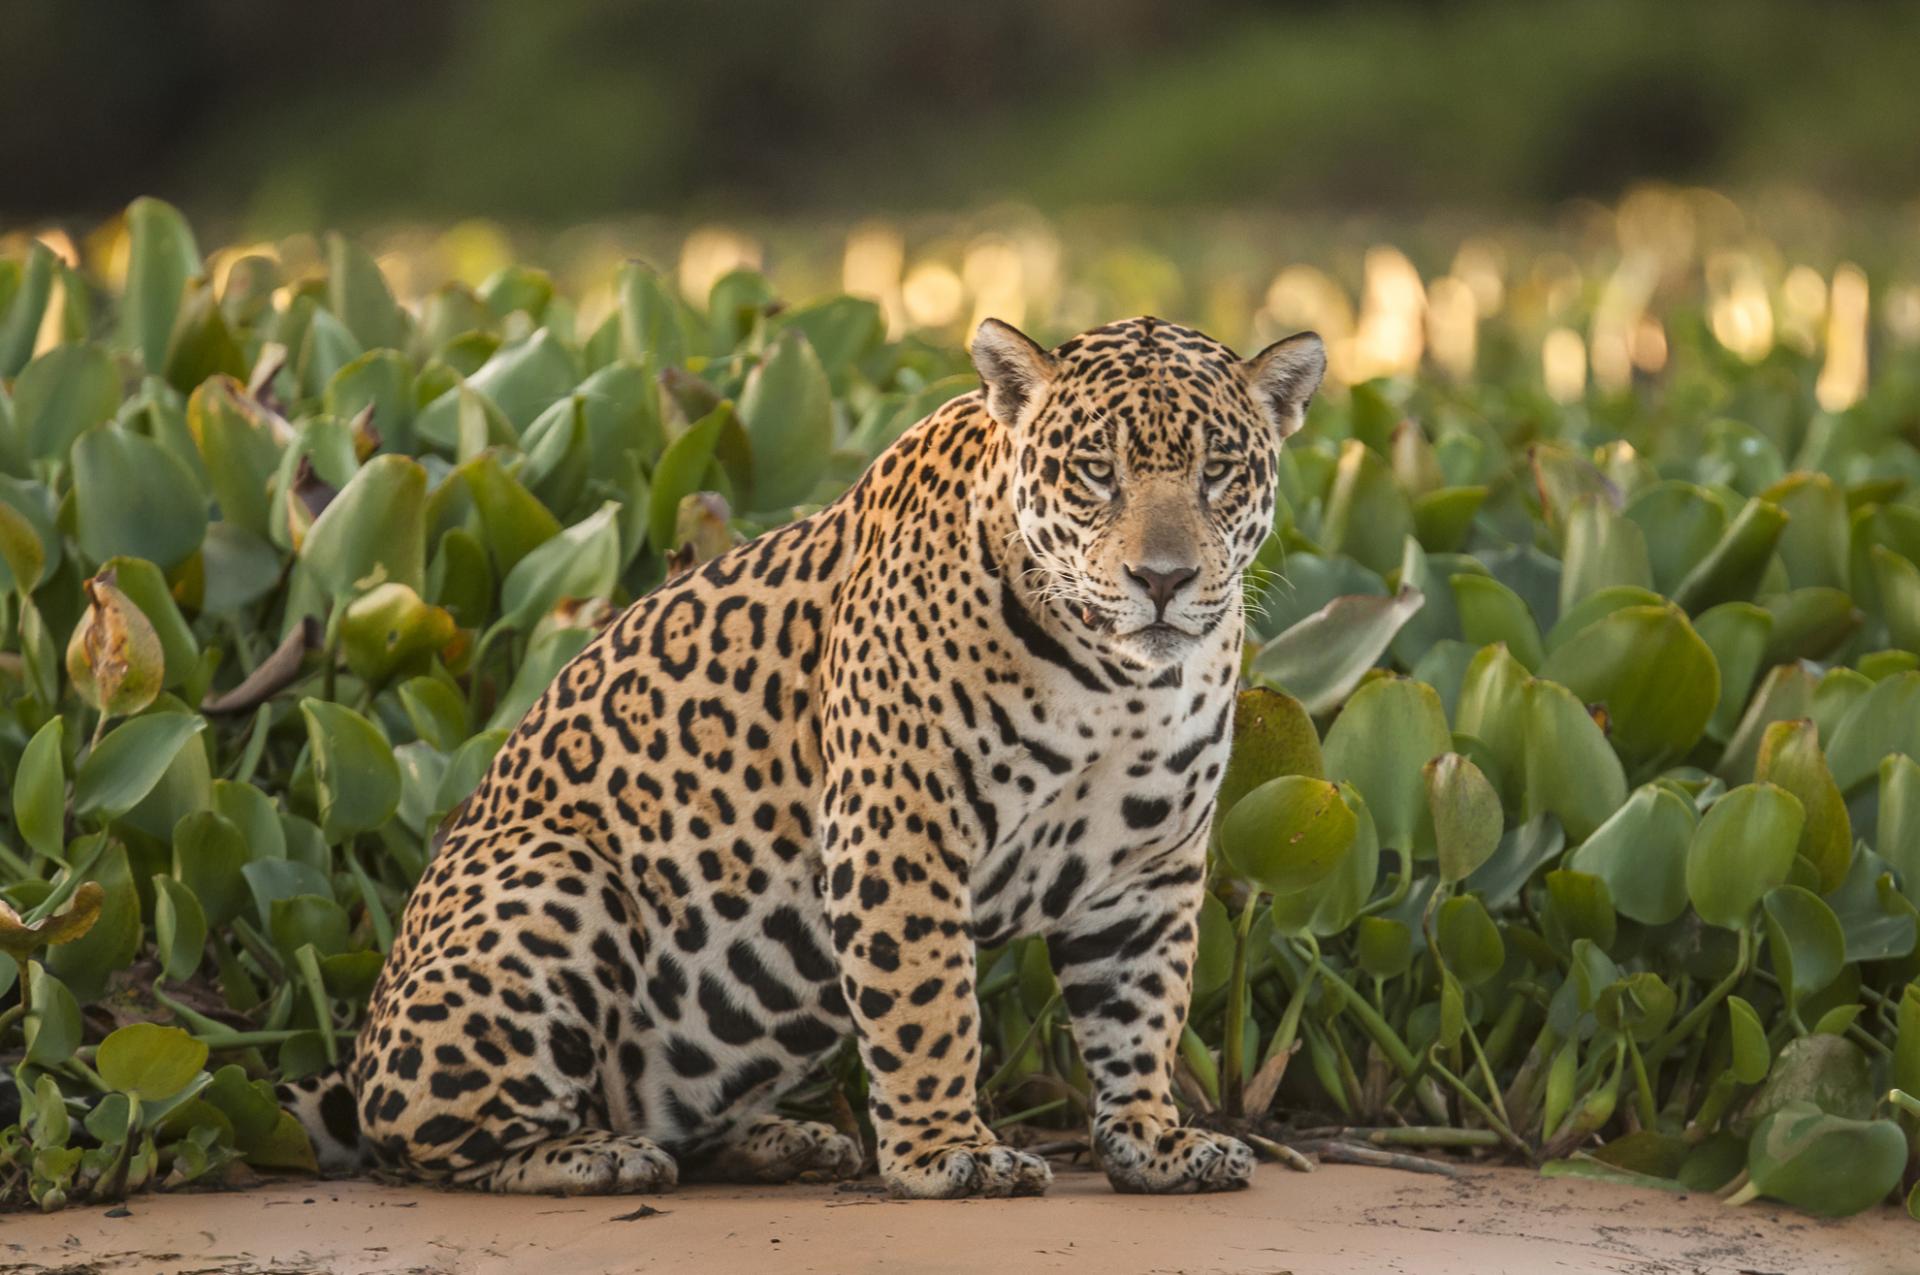 A Jaguar spotted at the riverbanks of the northern Pantanal